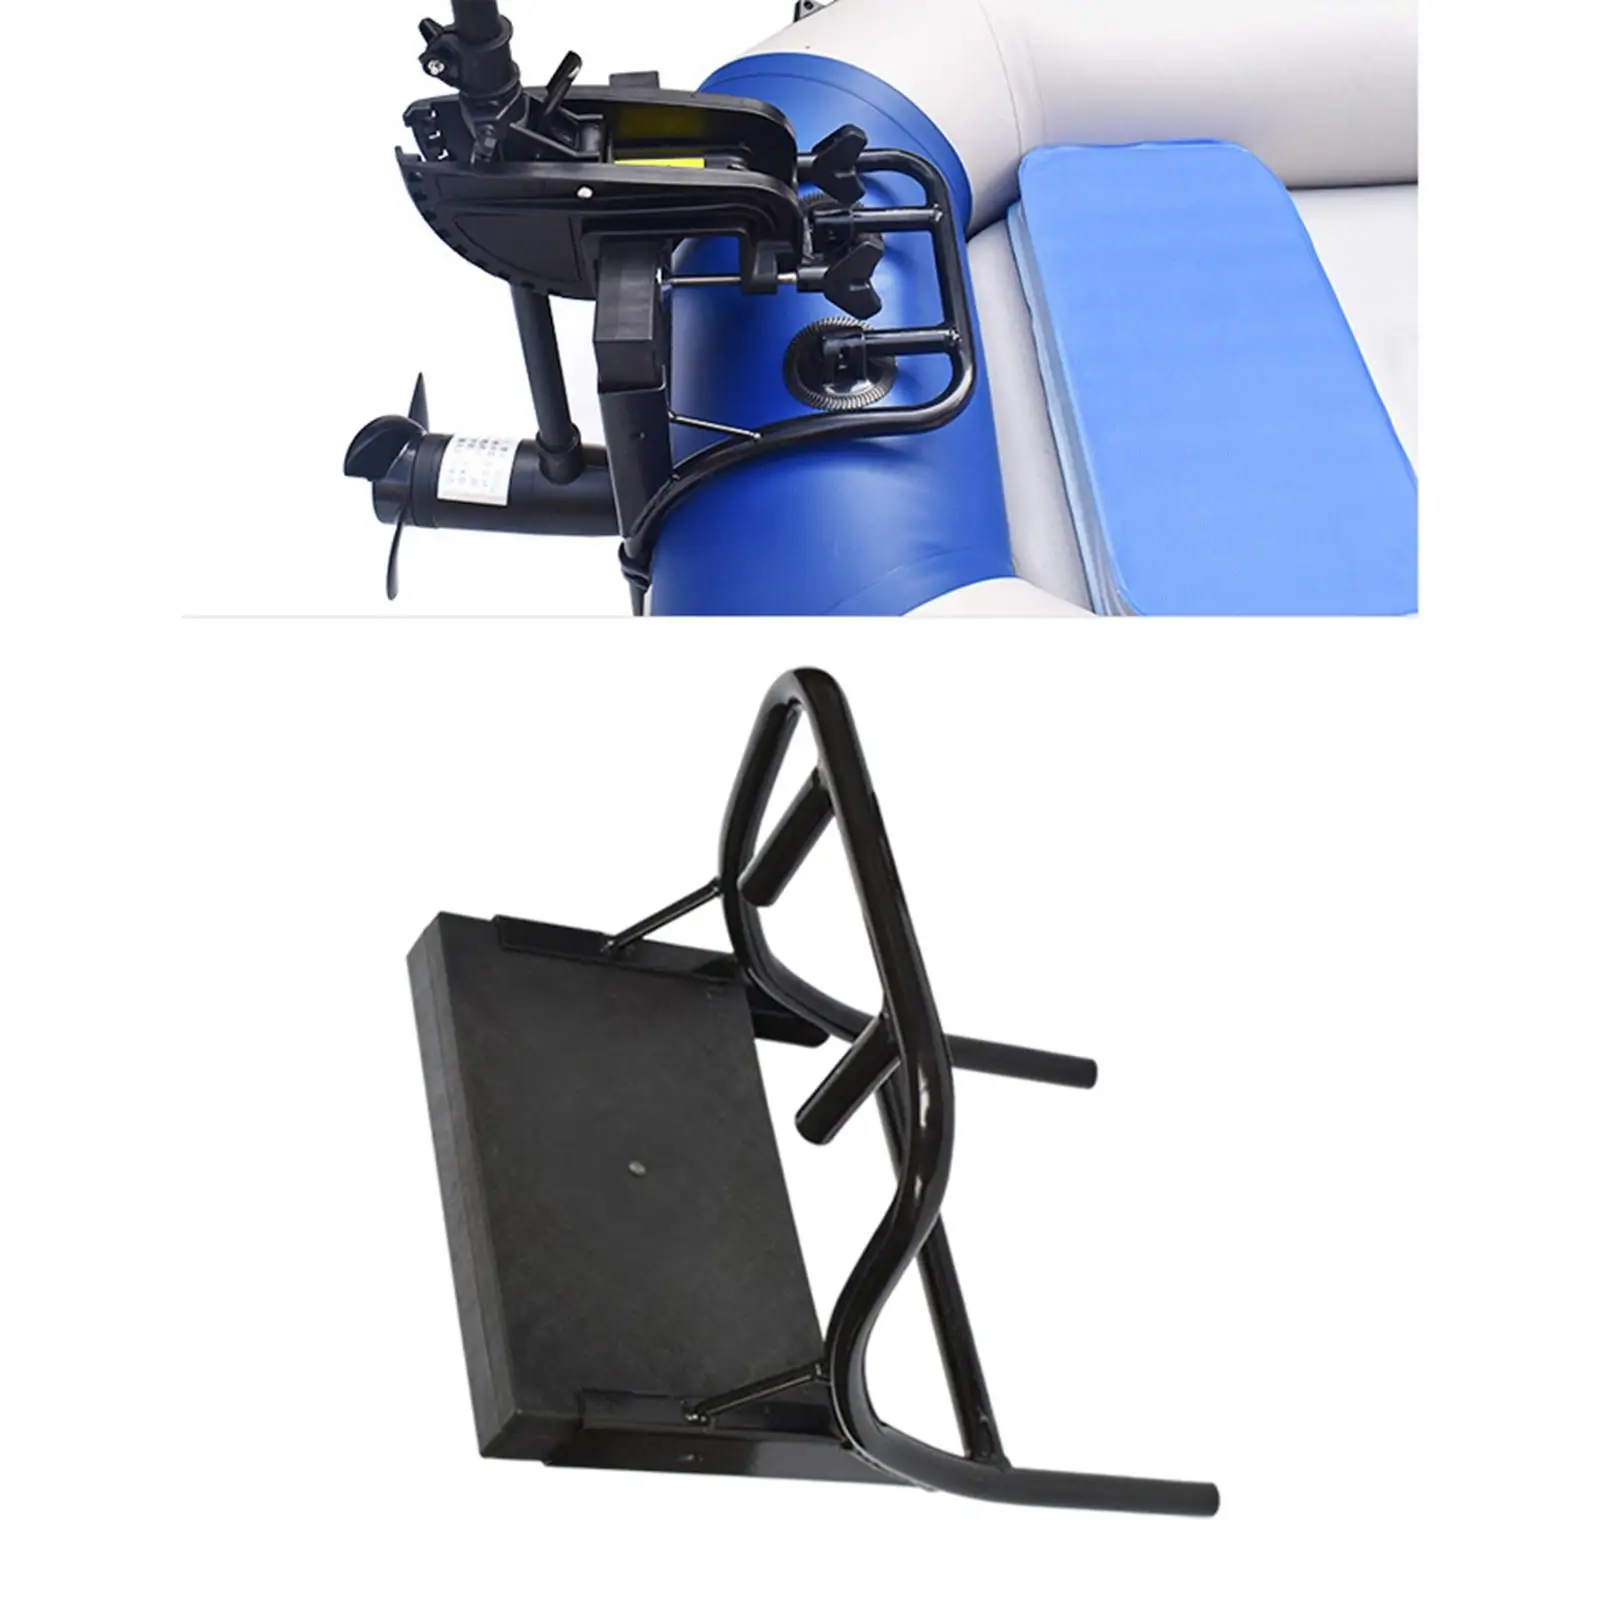 Kayak Outboard Motor Stand Accessories Support Fits for Inflatable Boat